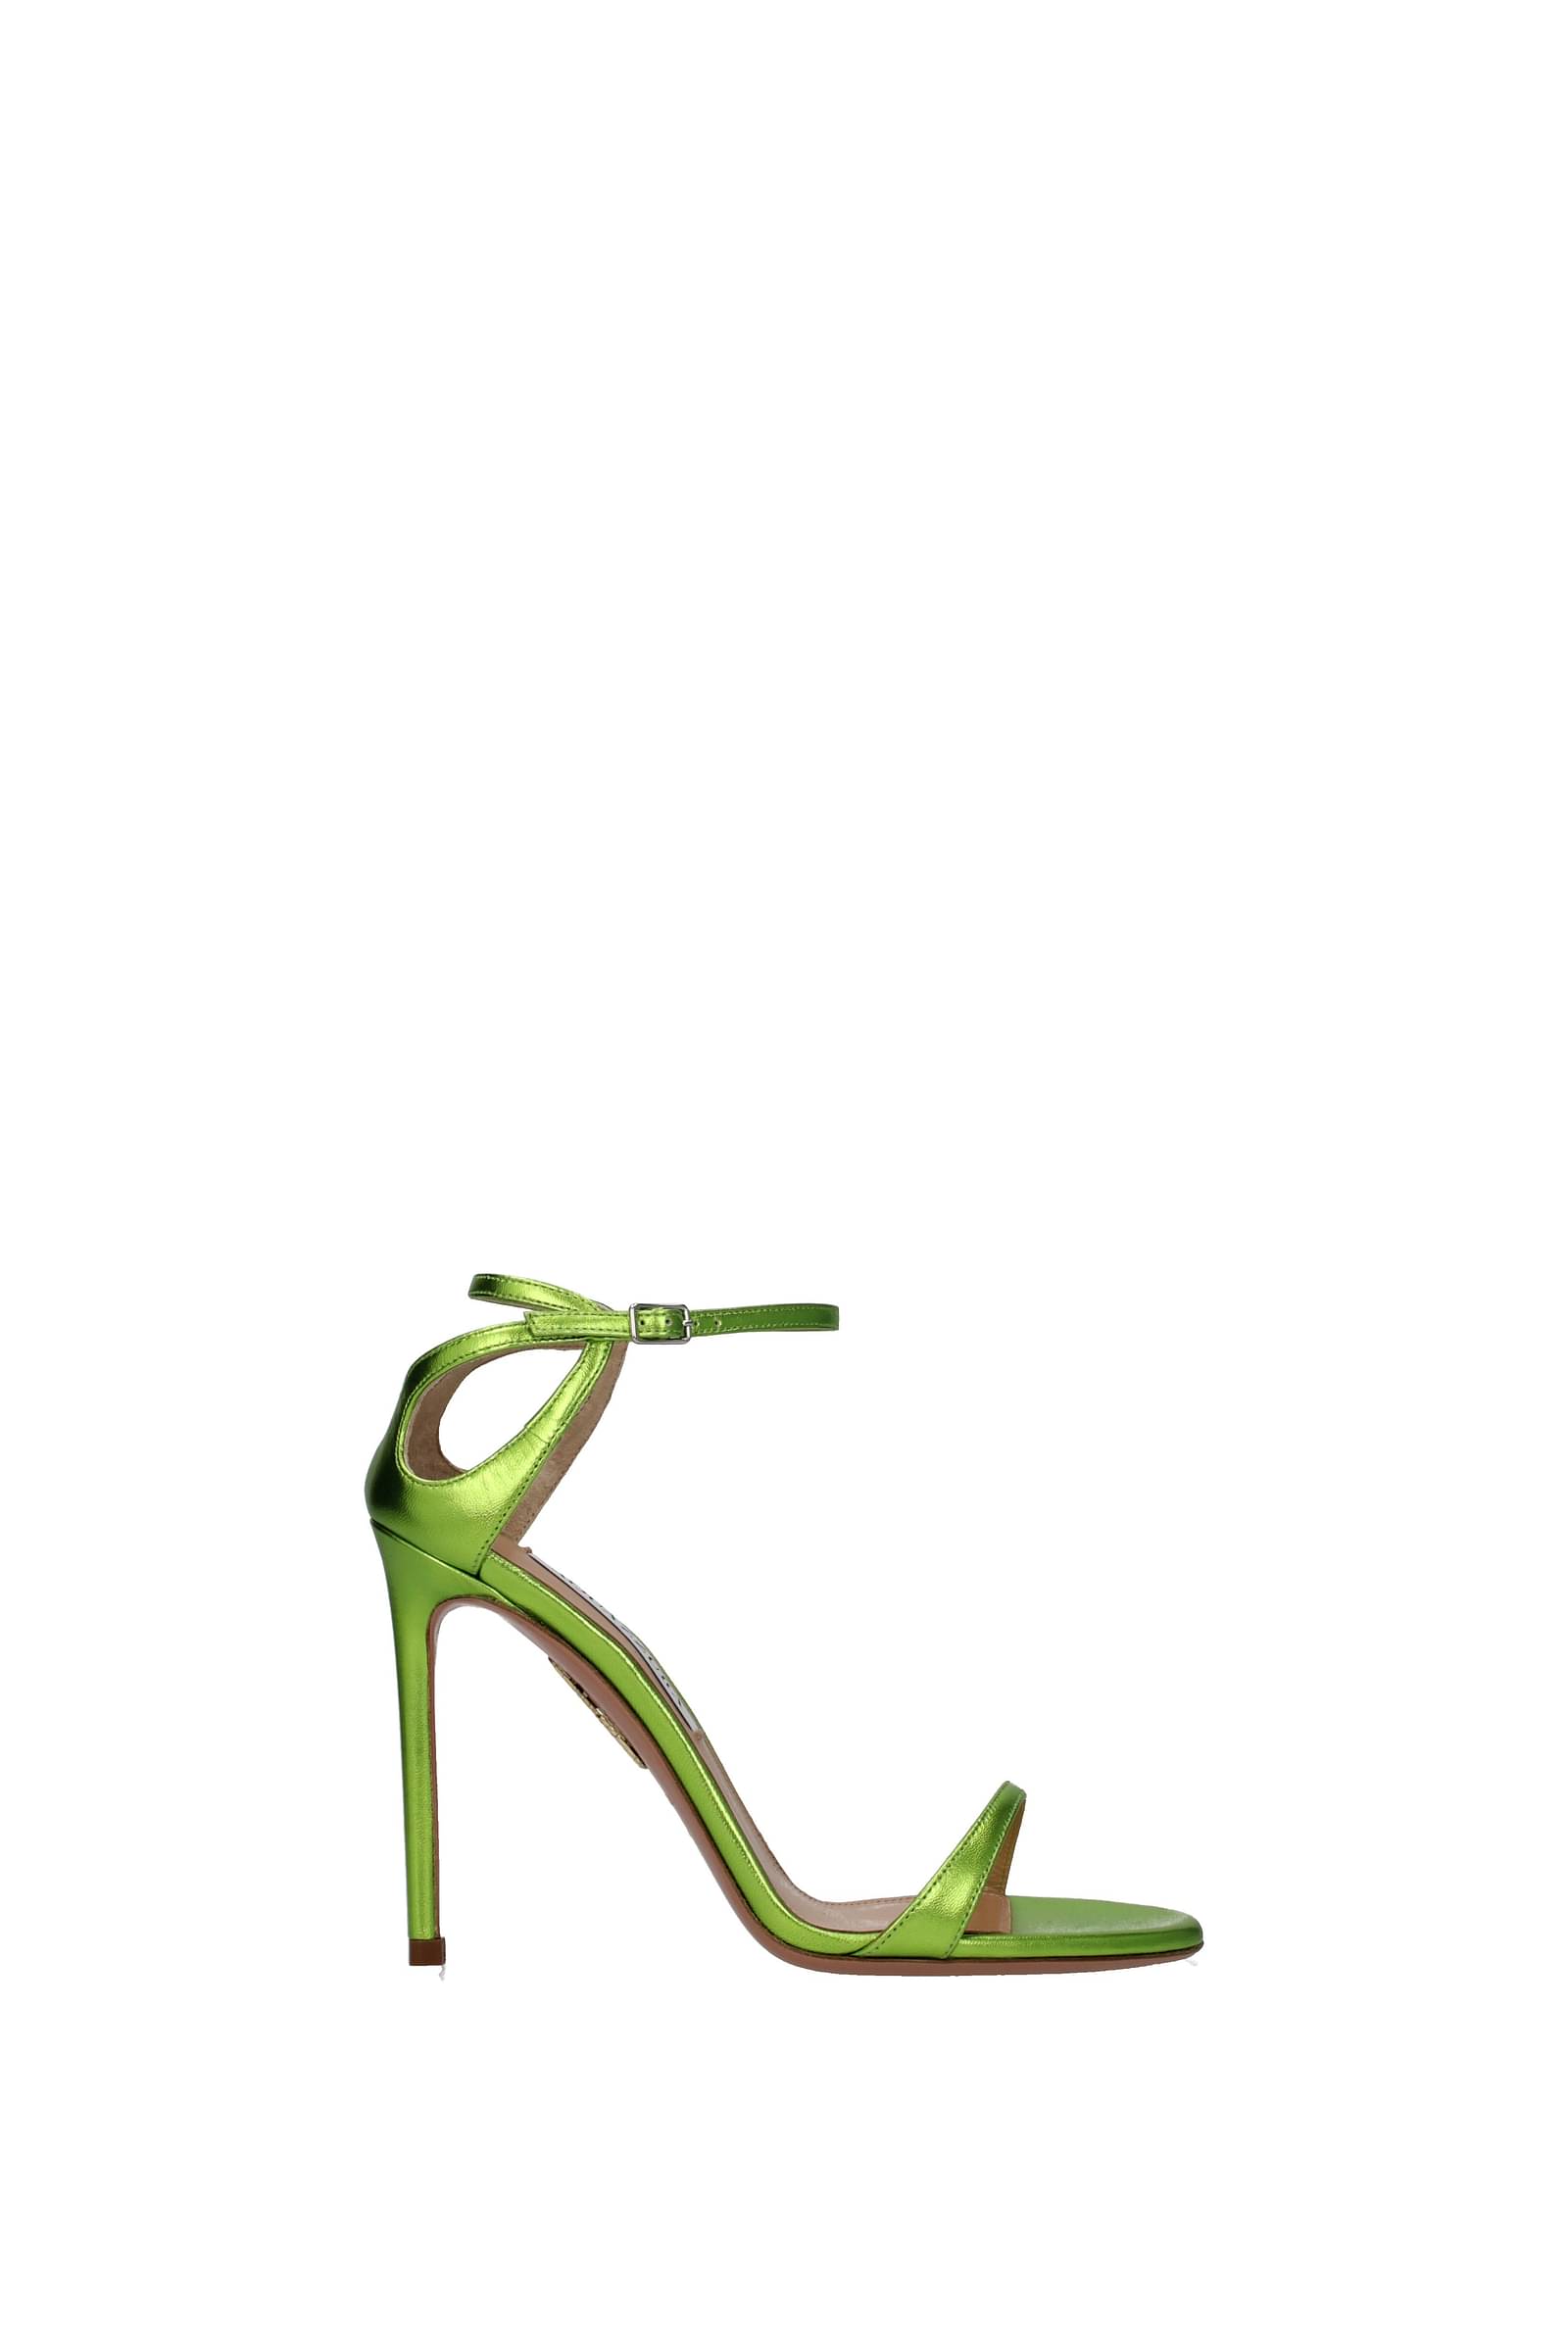 ASOS DESIGN Harris barely there heeled sandals in neon green | ASOS